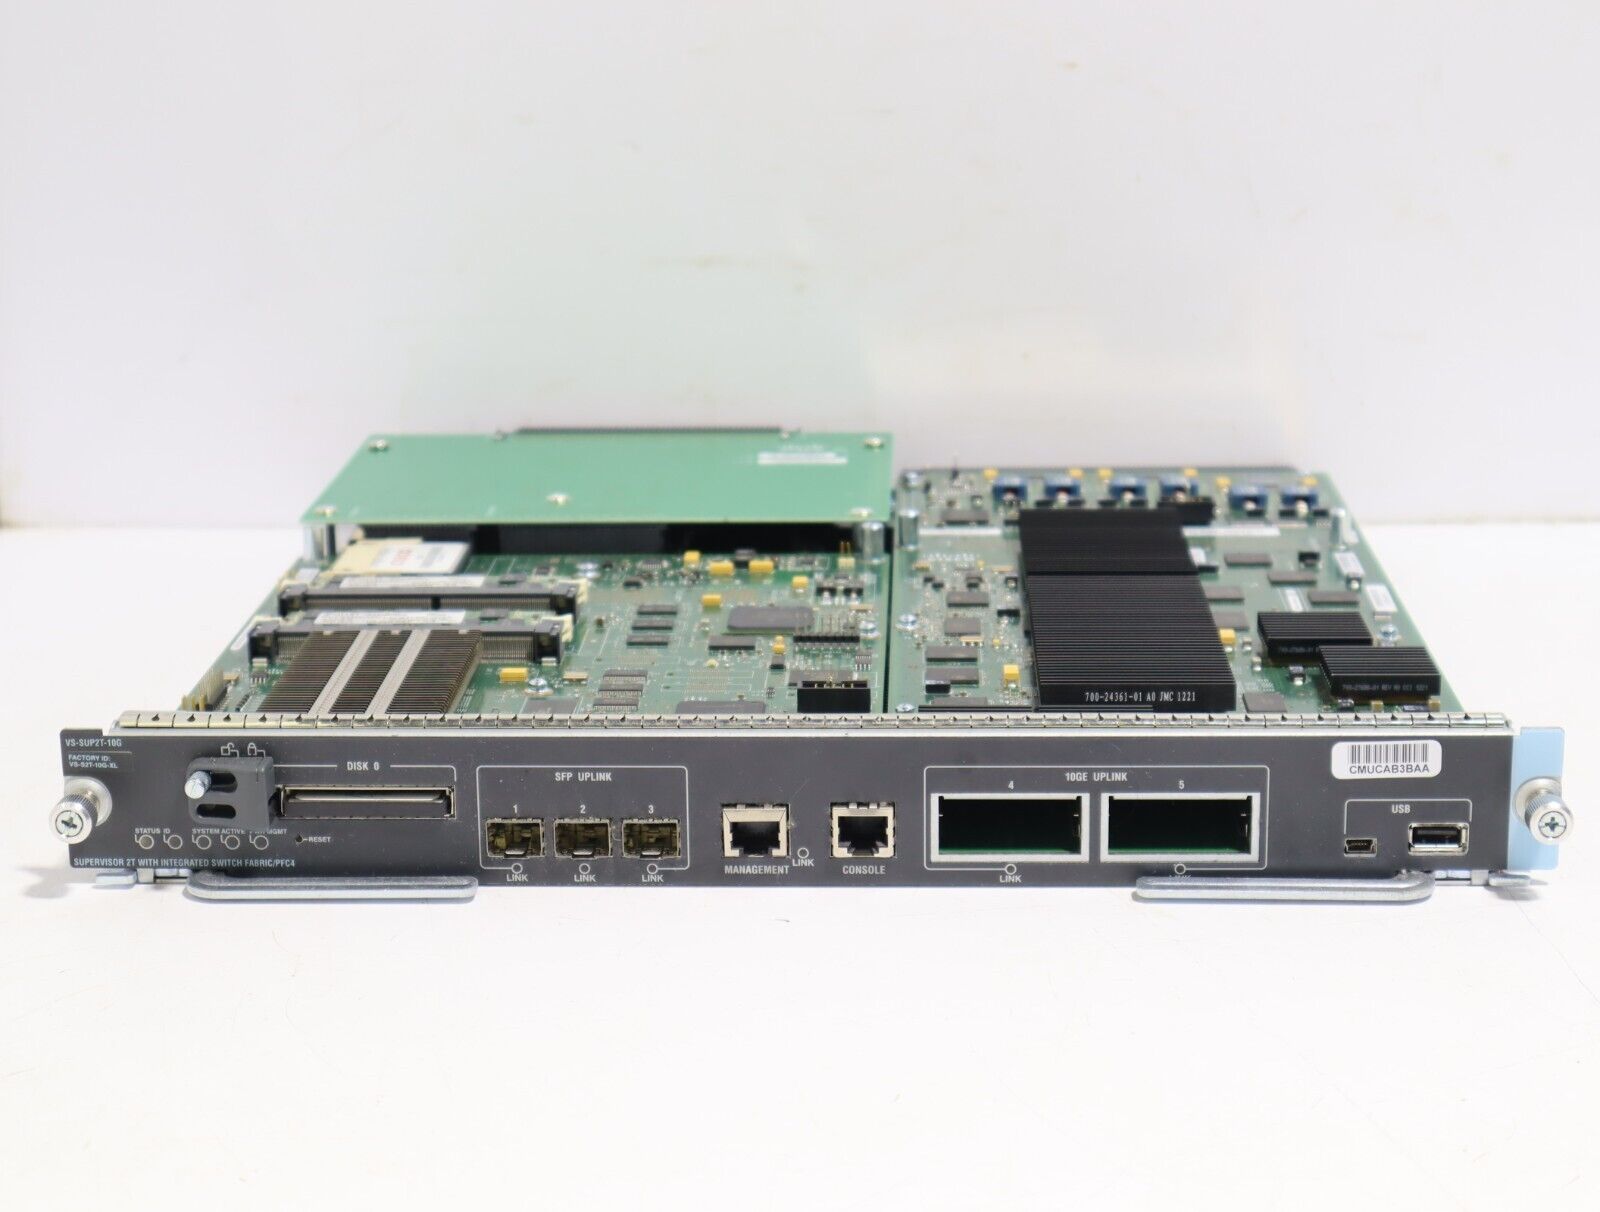 Cisco VS-SUP2T-10G Supervisor 2T with integrated switch fabric/PFC4(4K-012)